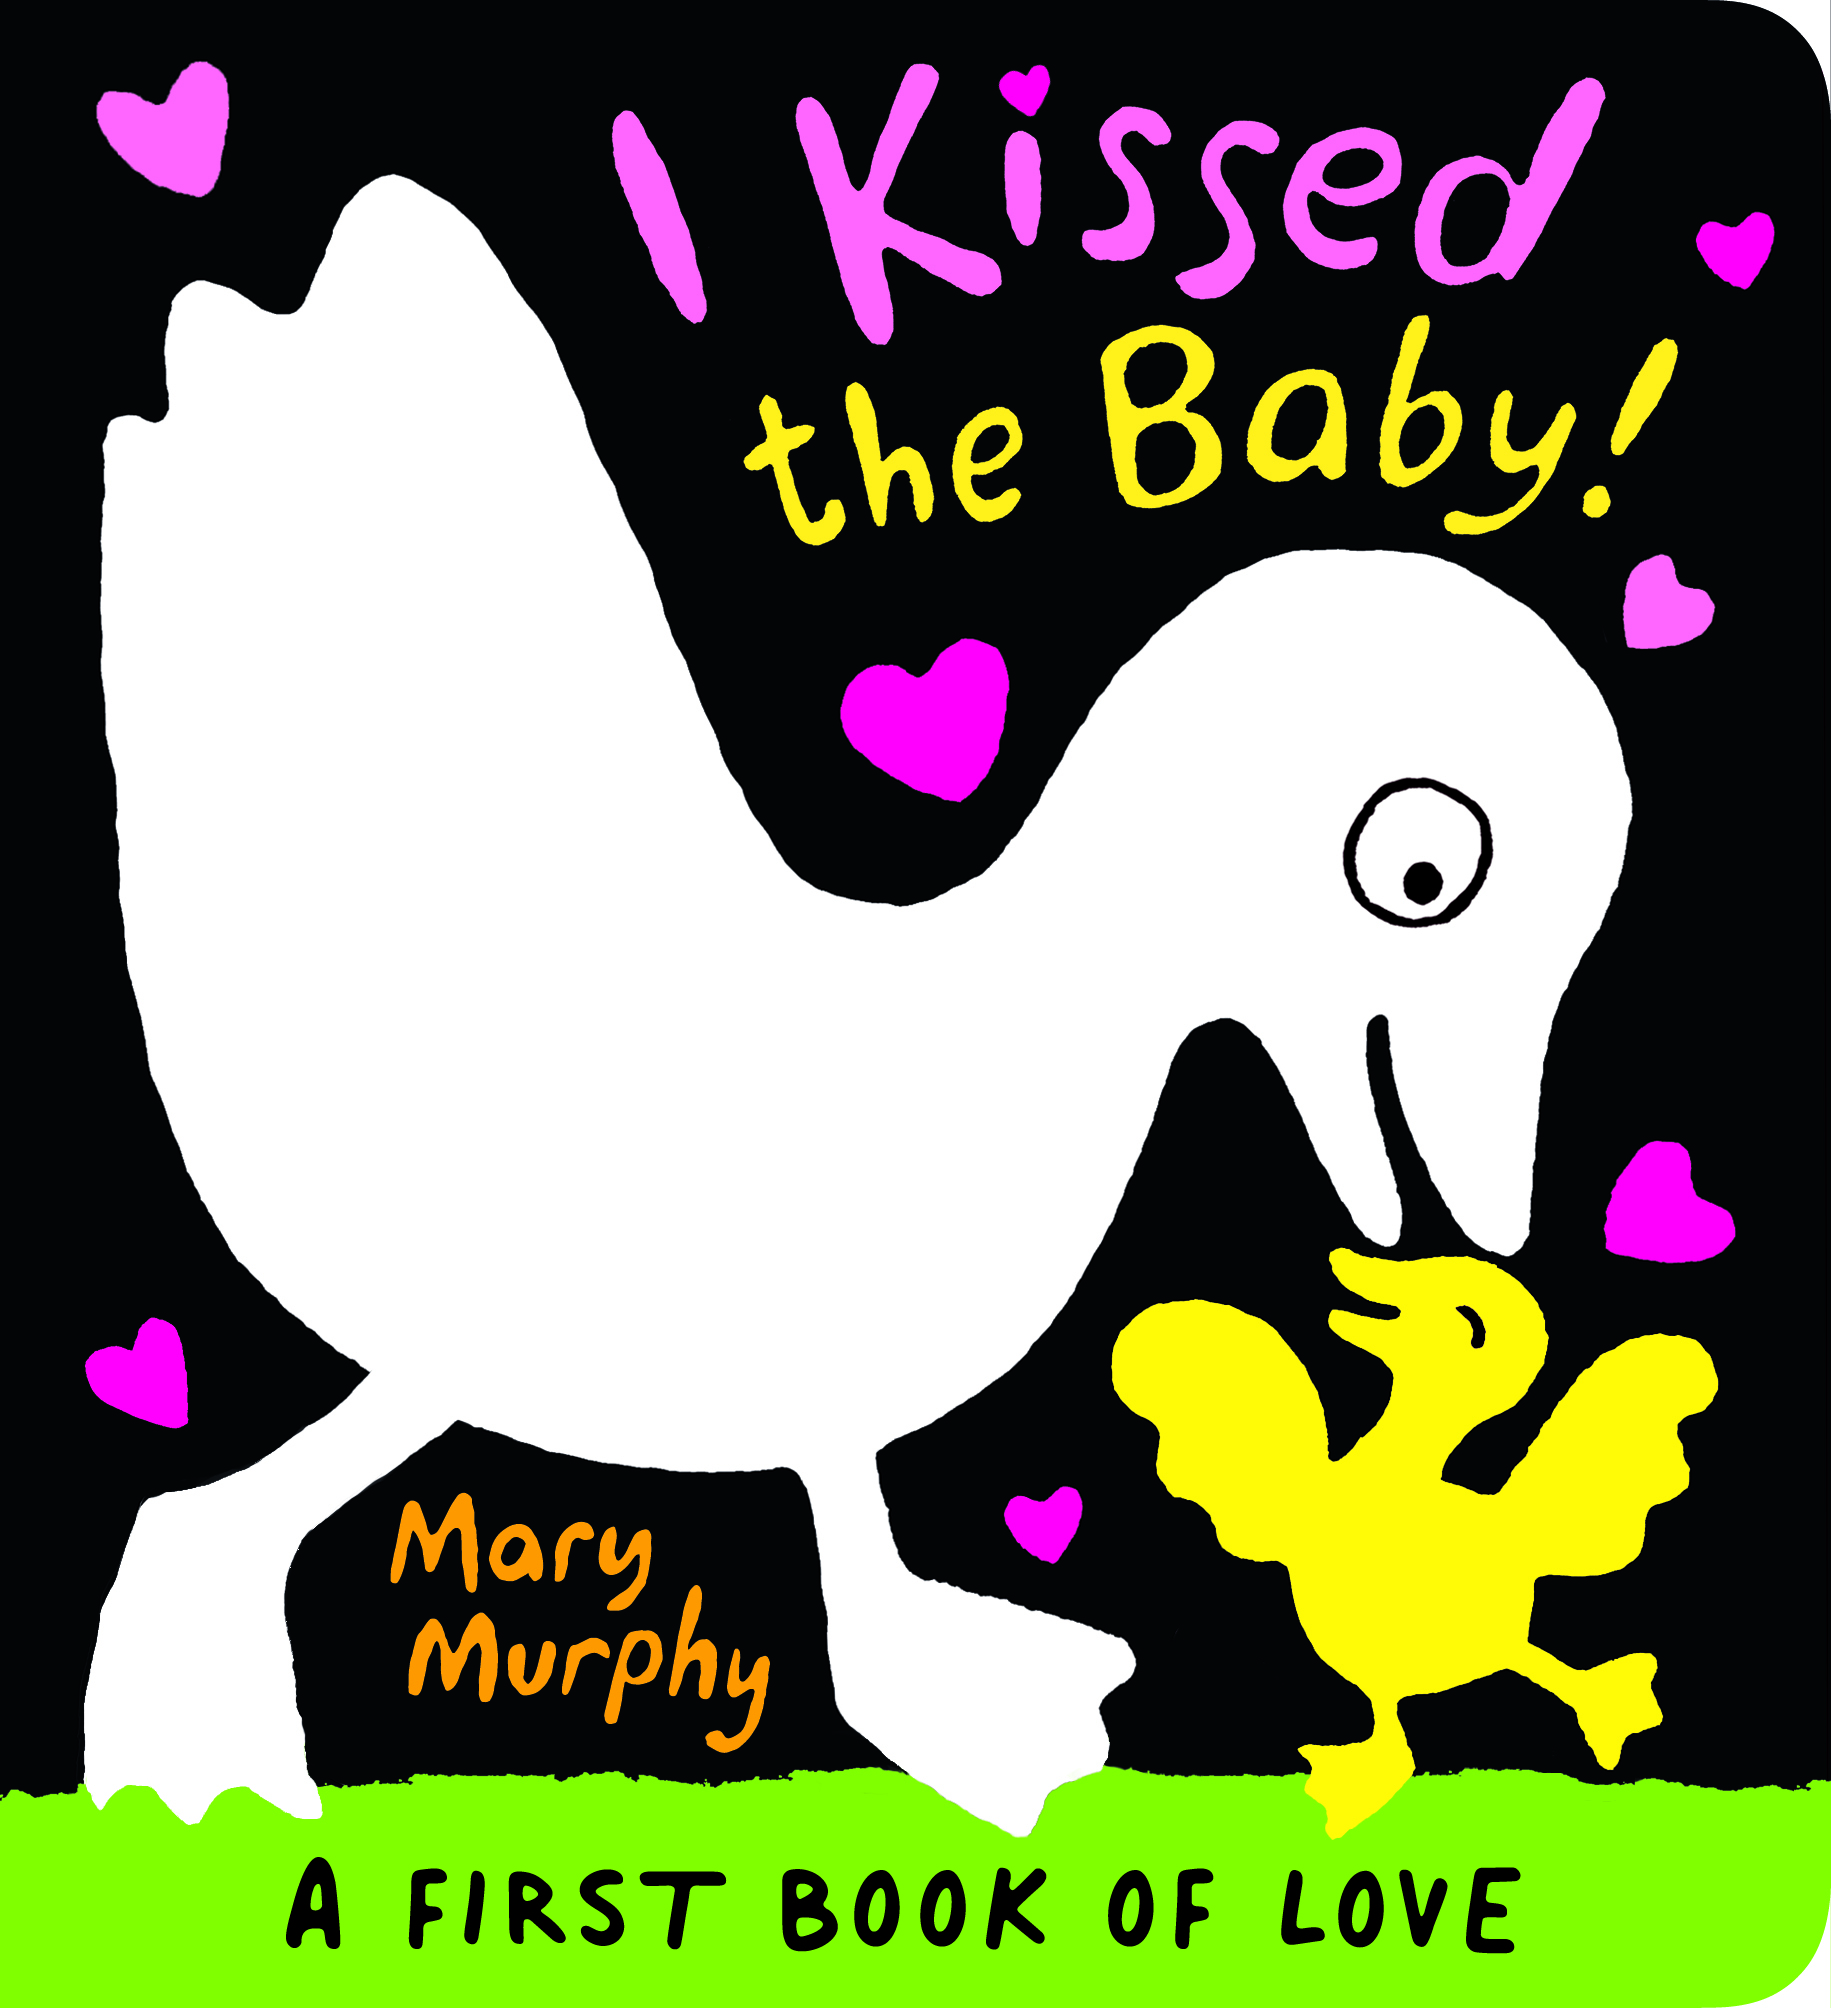 I-Kissed-the-Baby